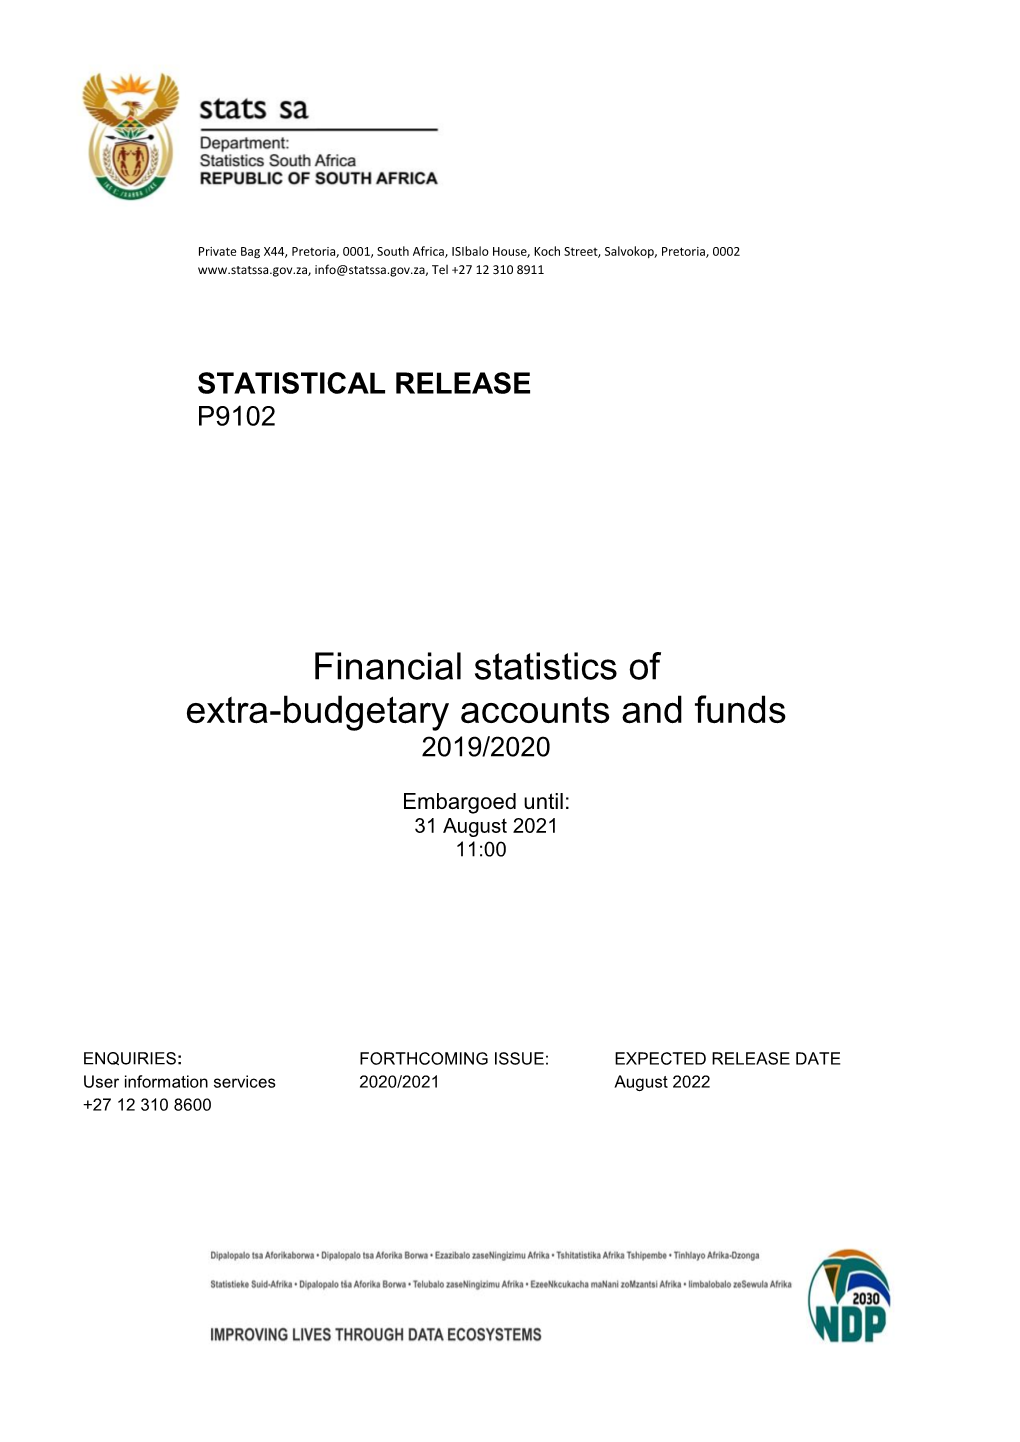 Financial Statistics of Extra-Budgetary Accounts and Funds 2019/2020